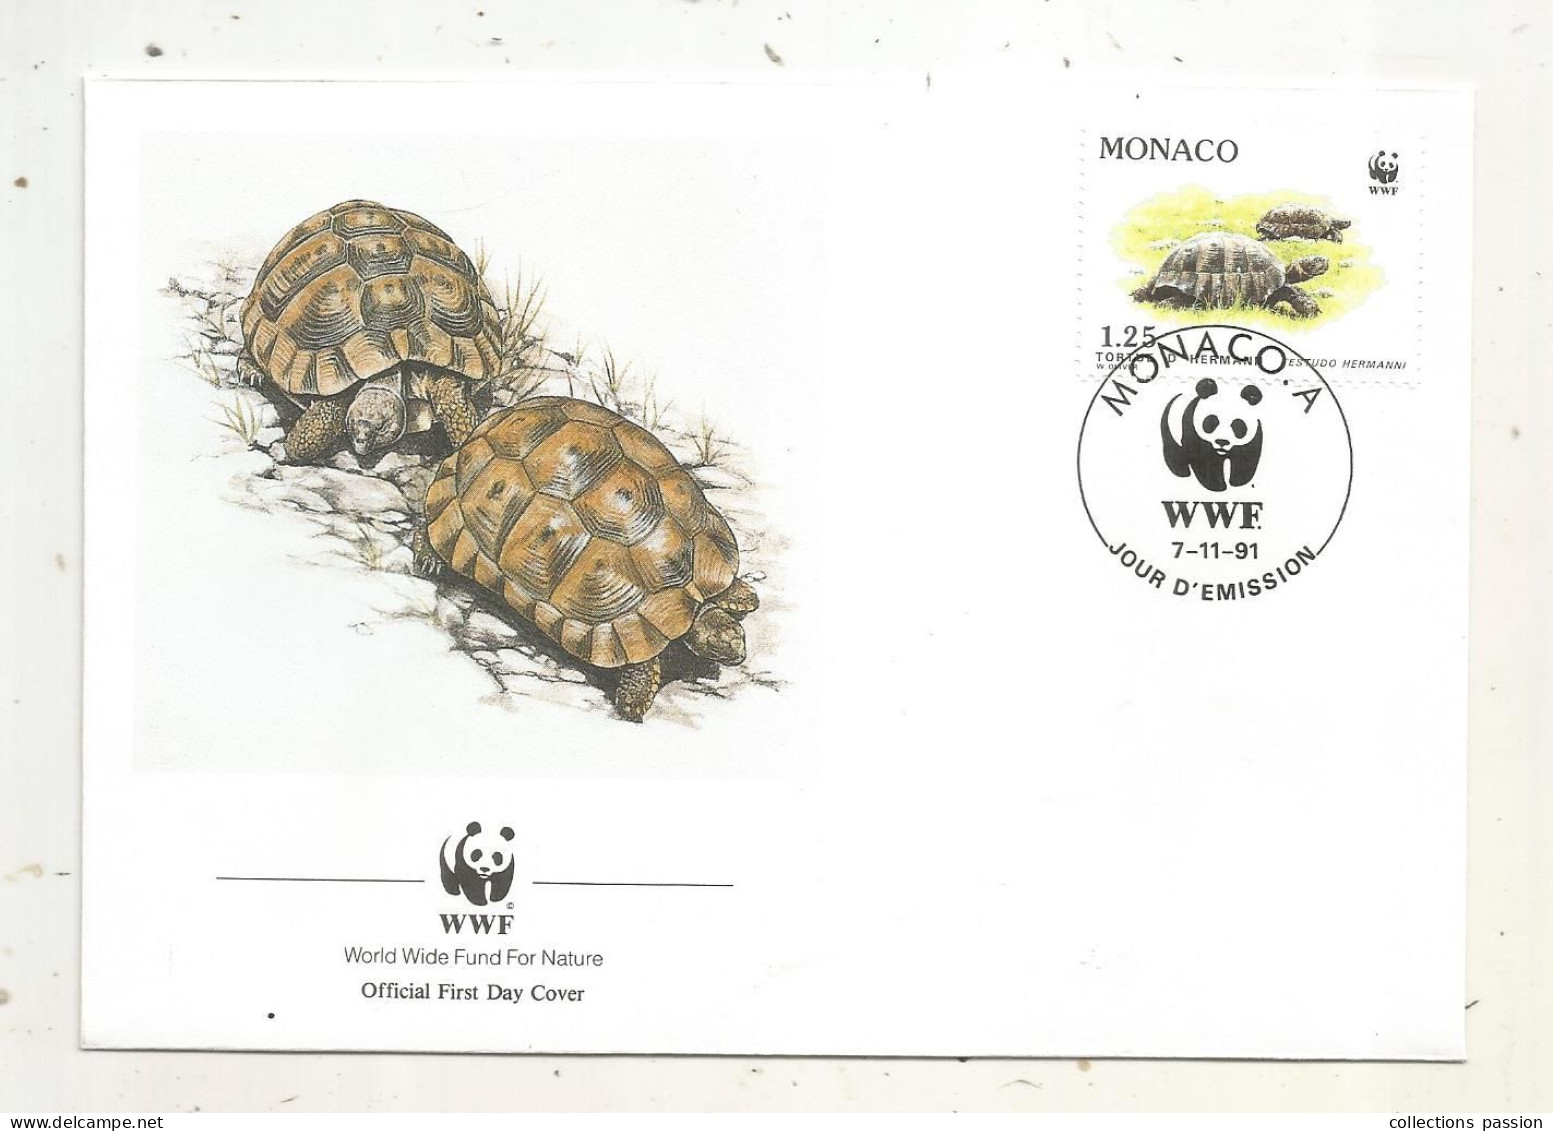 Official FDC, WWF, TORTUE D'Hermann, MONACO. A, 7-11-91 - FDC